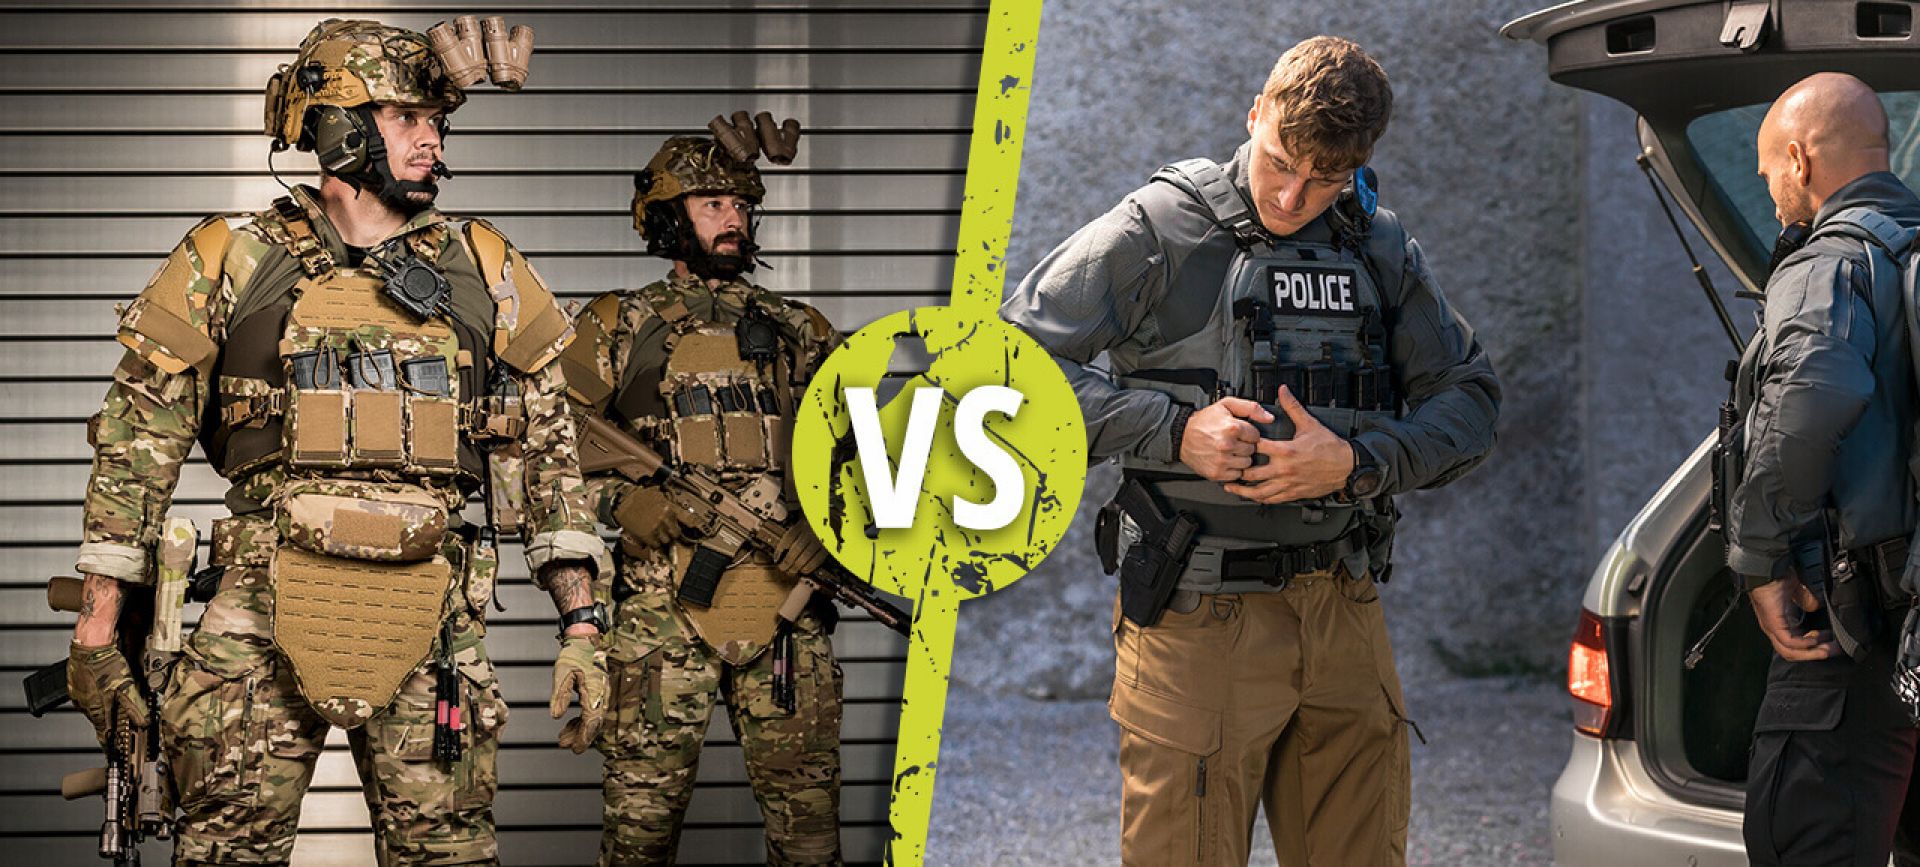 LOF Defence Systems - Body Armour & Tactical Gear For Police